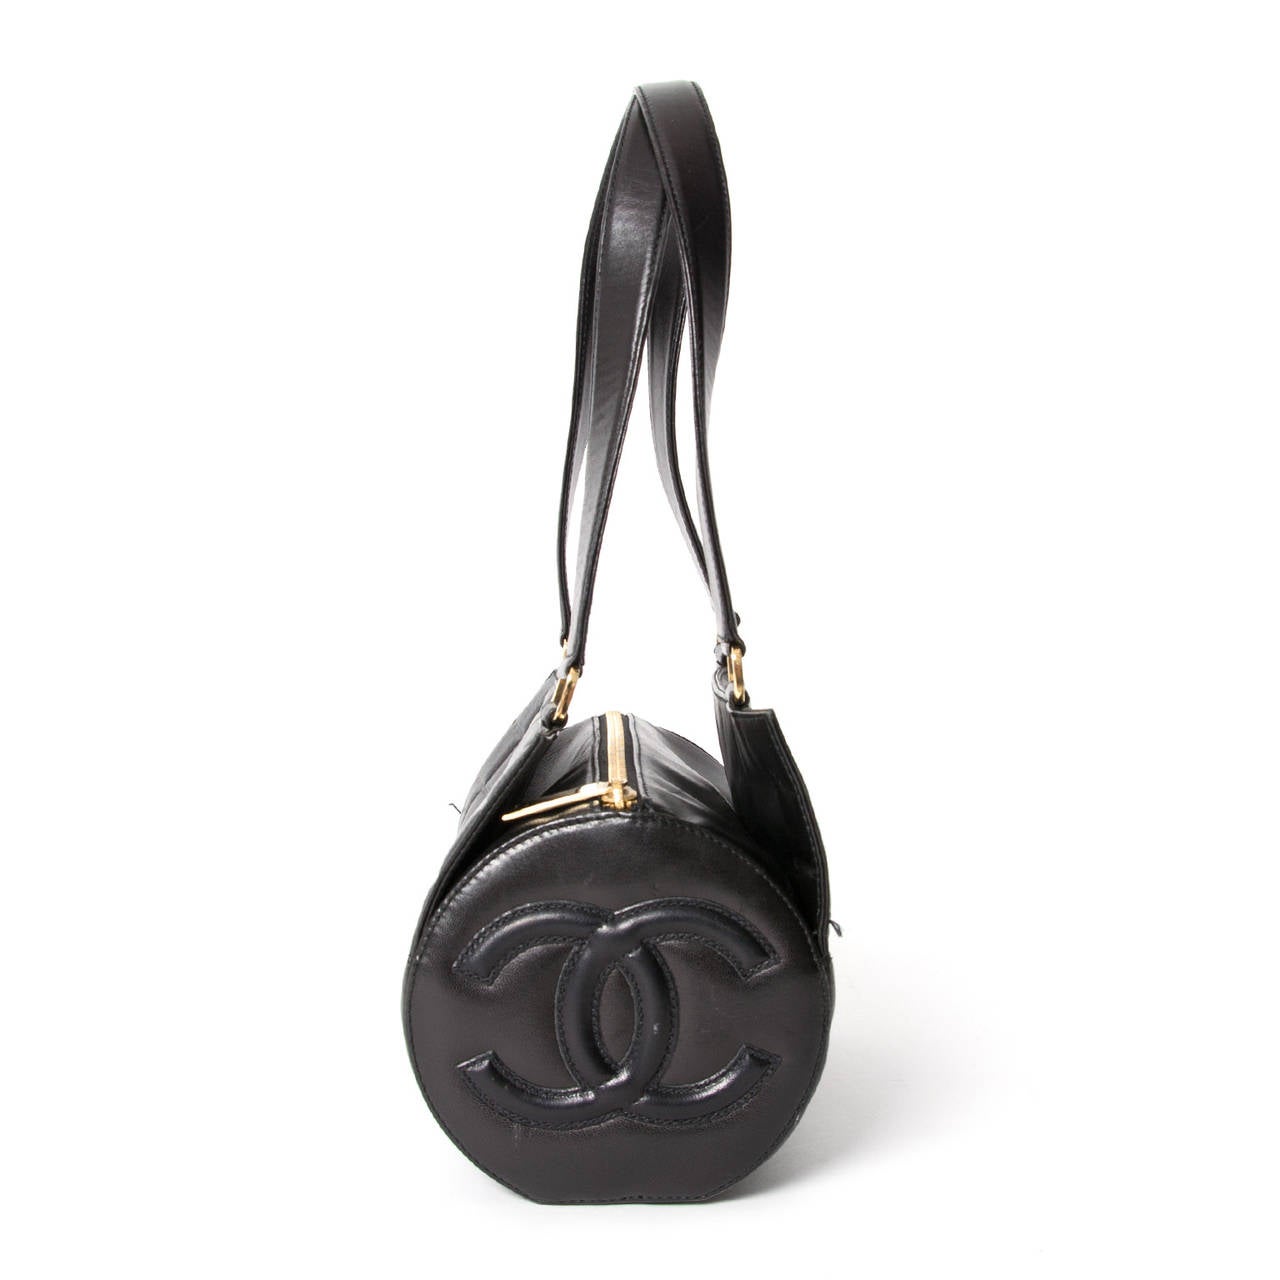 Chanel Black Round Leather Handbag

This little black Chanel bag matches every outfit. The size of the bag is perfect to fit all your daily essentials. 

The bag is accented with goldplated details. There are four studs on the bottom of the bag